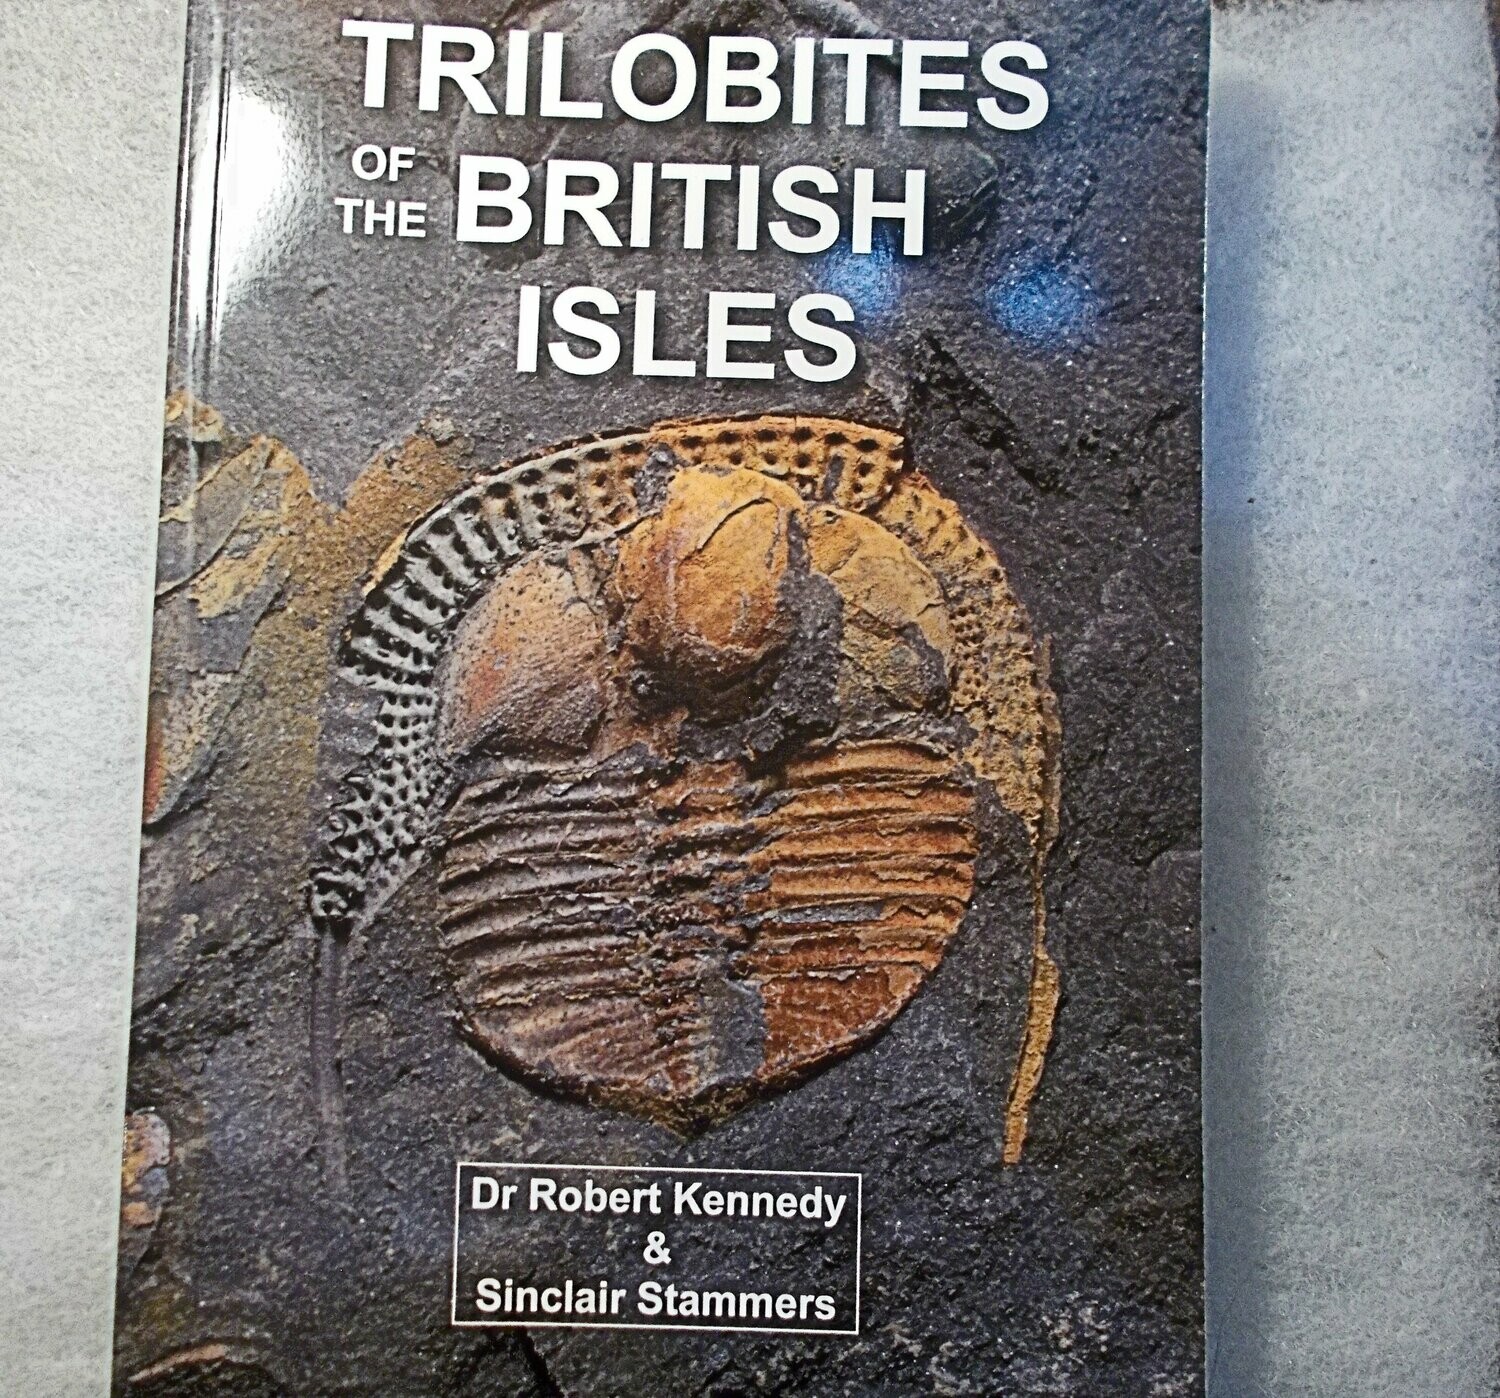 TRILOBITES of the BRITISH ISLES Kennedy & Stammers 2018. Lavishly illustrated comprehensive modern overview of British and Irish trilobites